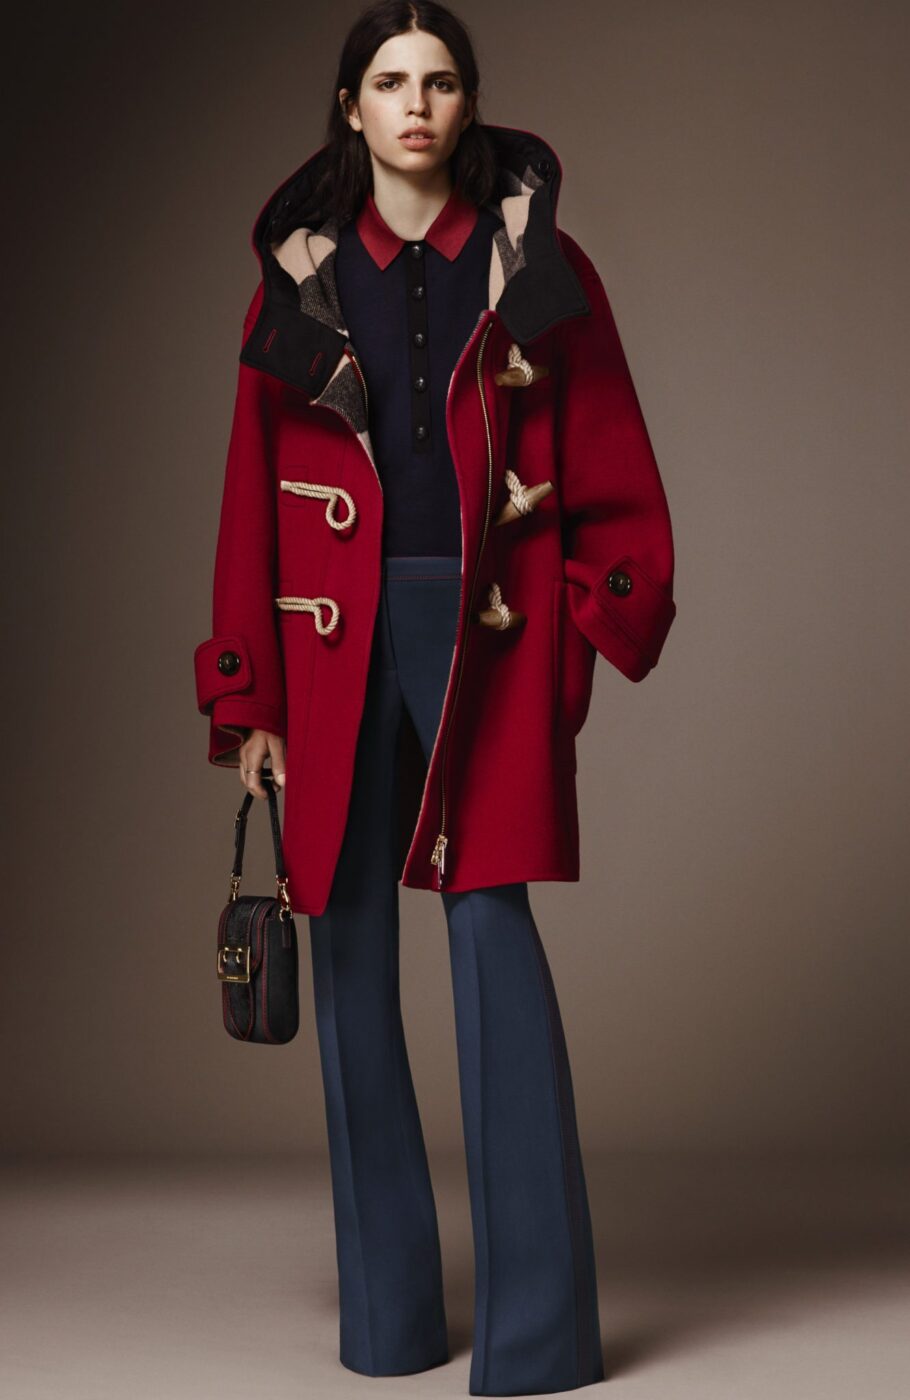 Burberry Pre-Fall 2016 Collection | LES FAÇONS